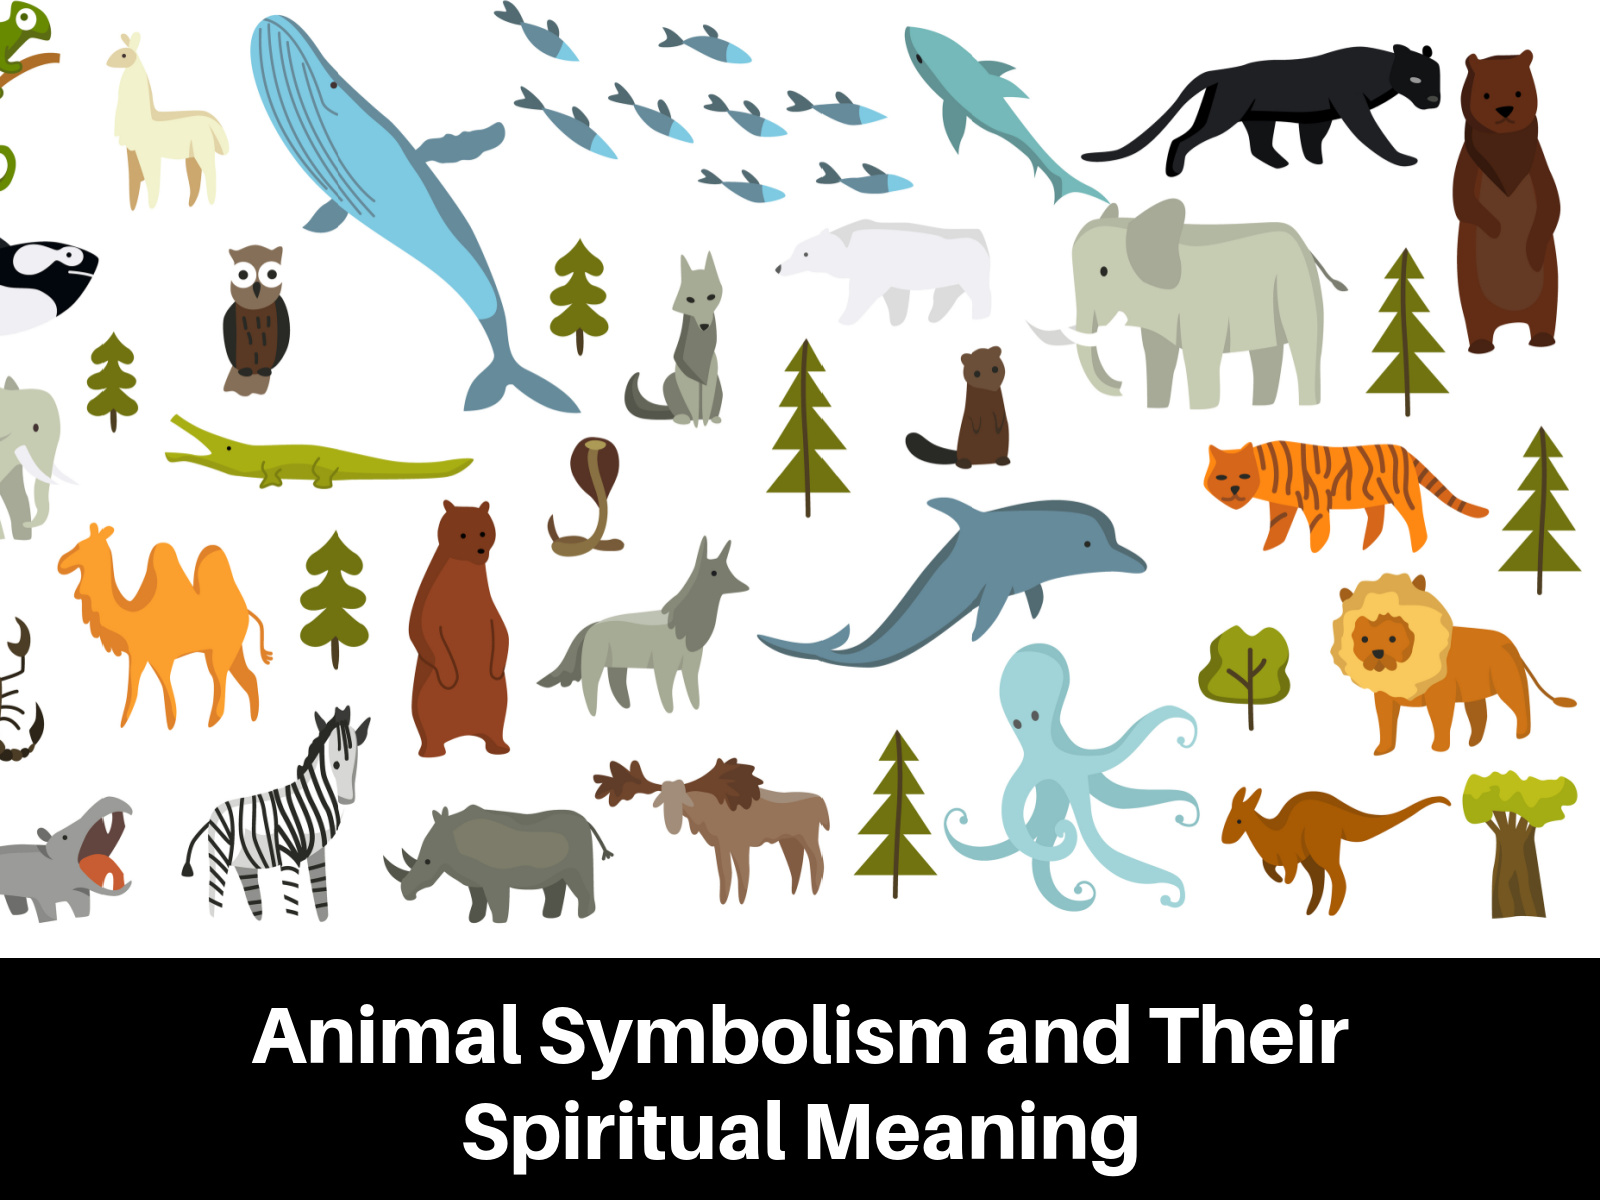 Animal Symbolism and Their Spiritual Meaning